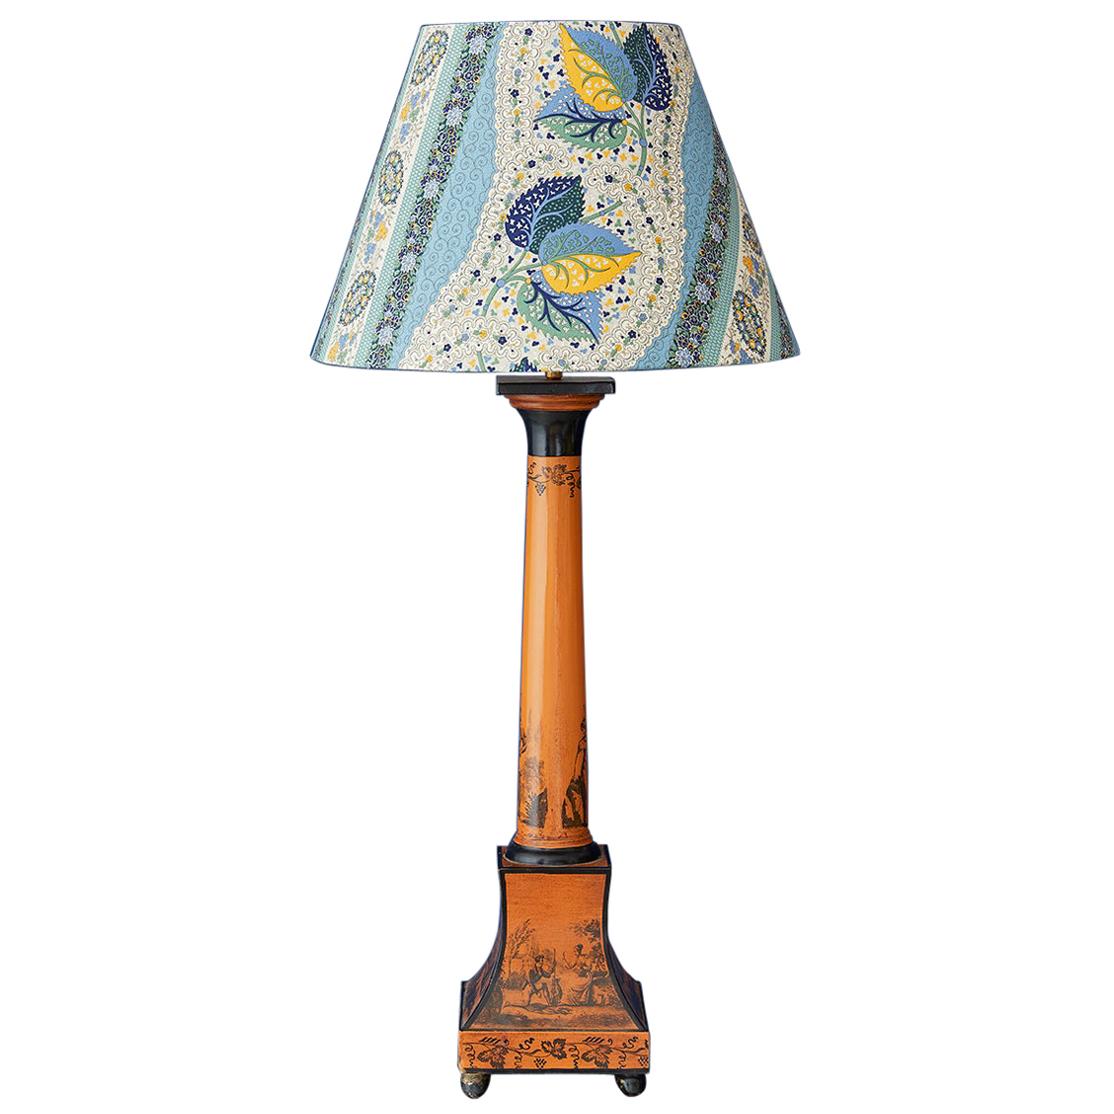 Vintage Painted Metal Table Lamp with Customized Shade, France Late 19th-Century